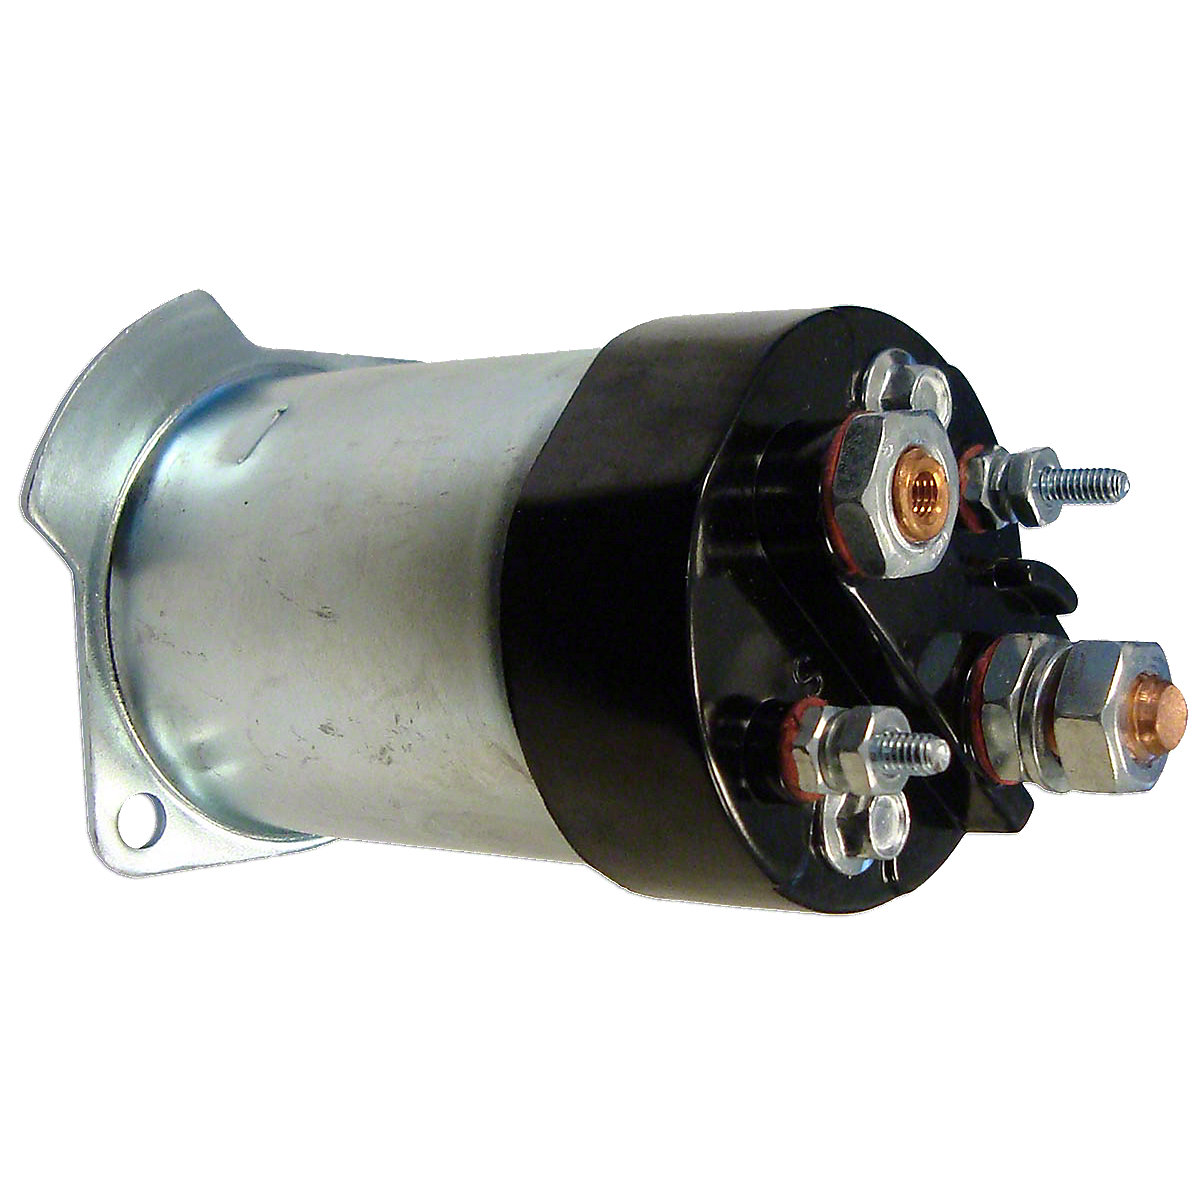 12 Volt Starter Solenoid For Delco Starters. - Starters - Farmall Parts